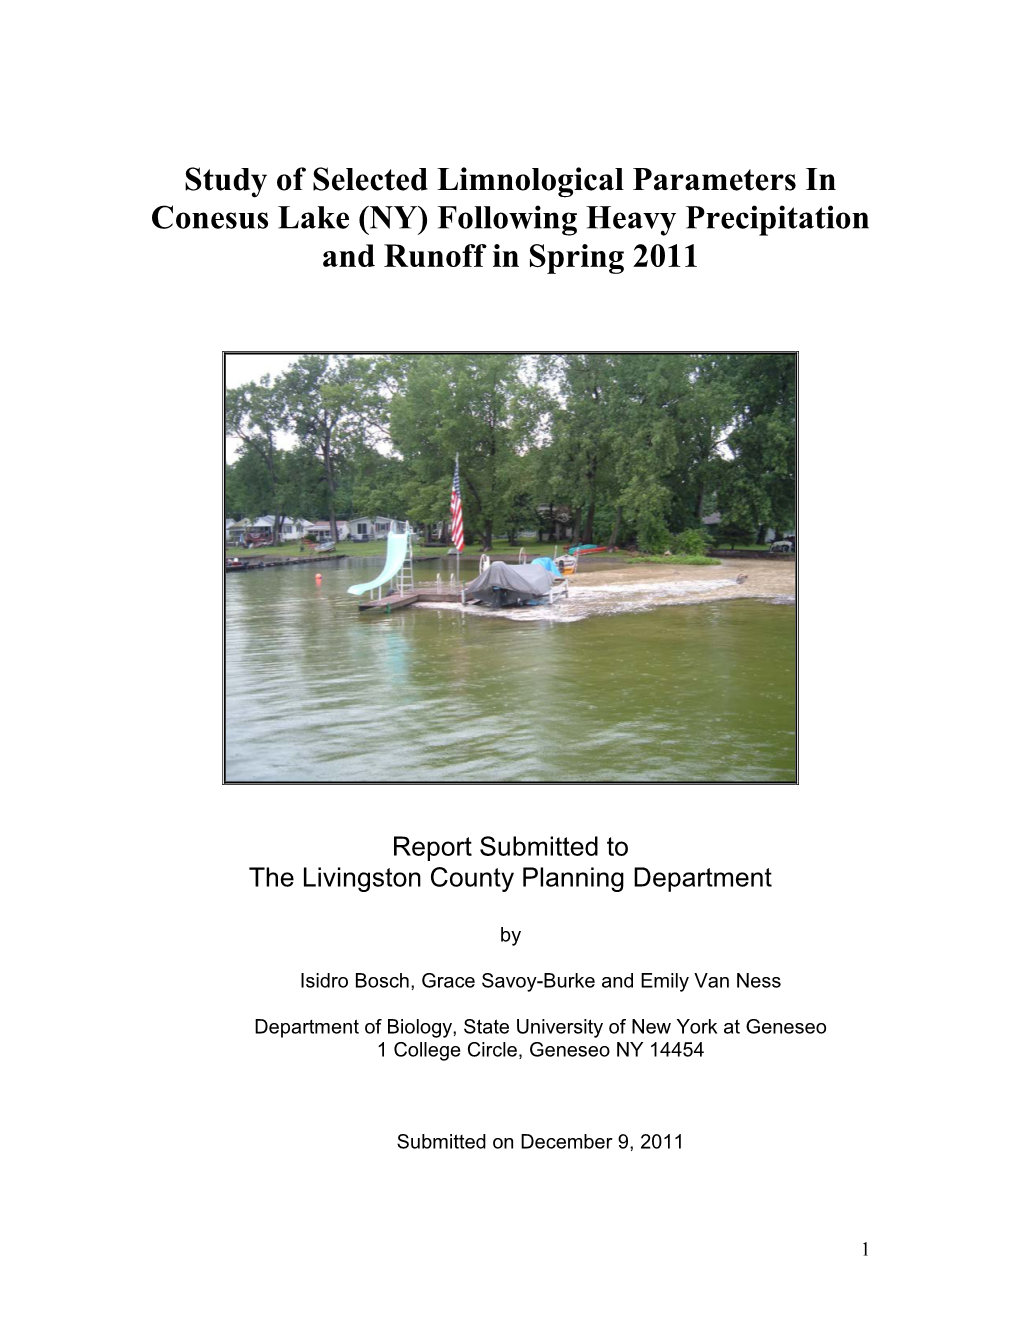 Study of Selected Limnological Parameters in Conesus Lake (NY) Following Heavy Precipitation and Runoff in Spring 2011